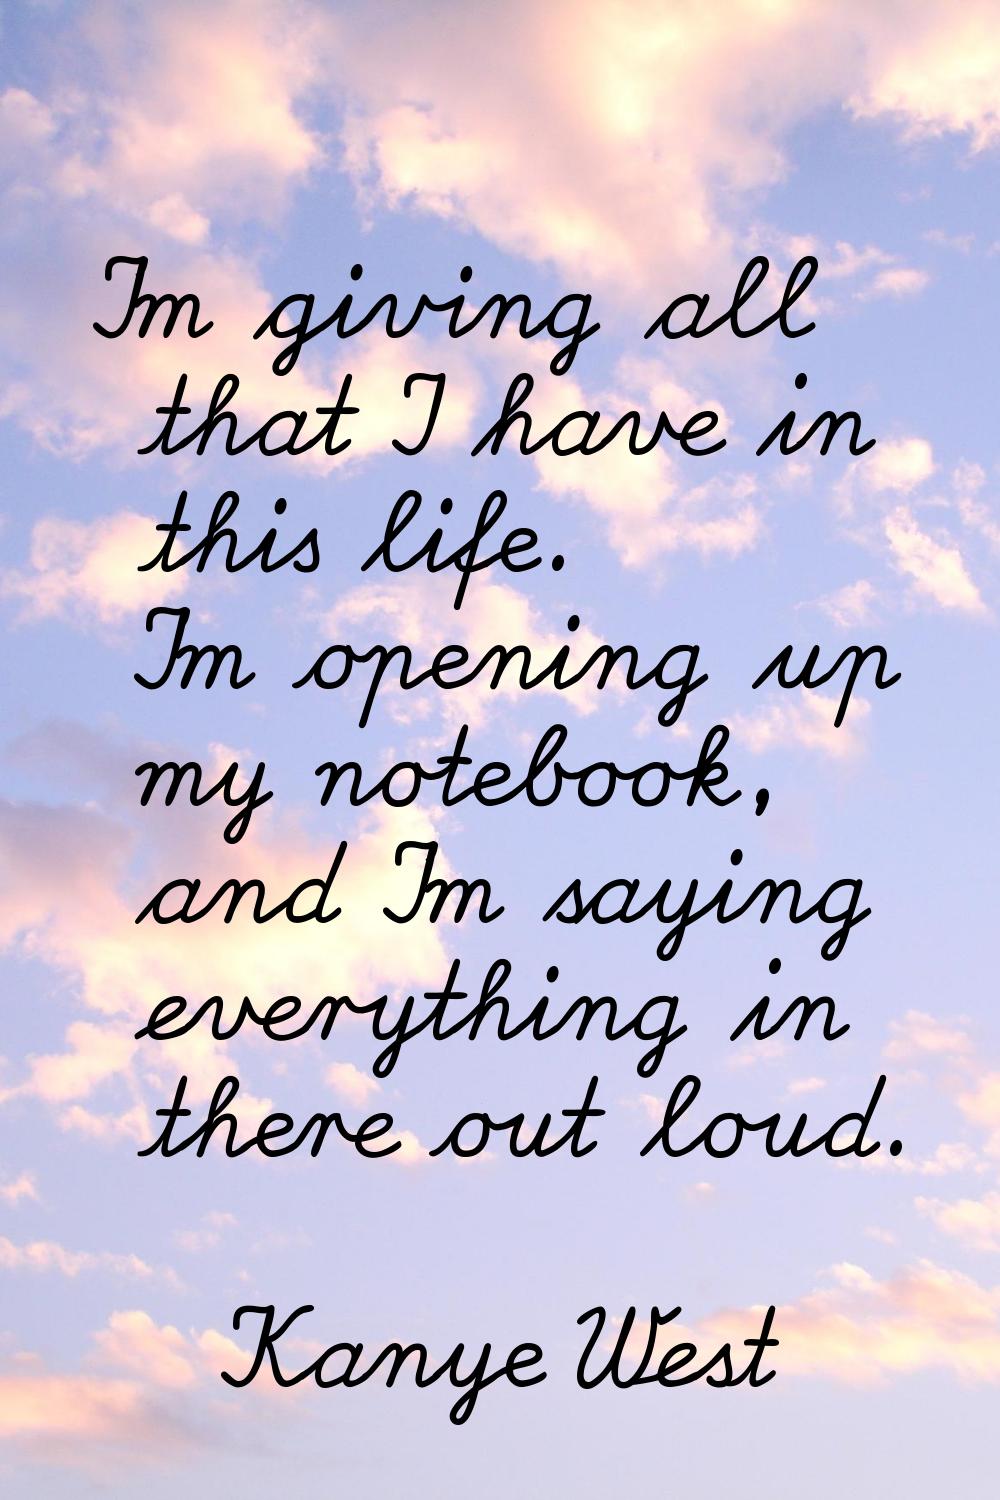 I'm giving all that I have in this life. I'm opening up my notebook, and I'm saying everything in t